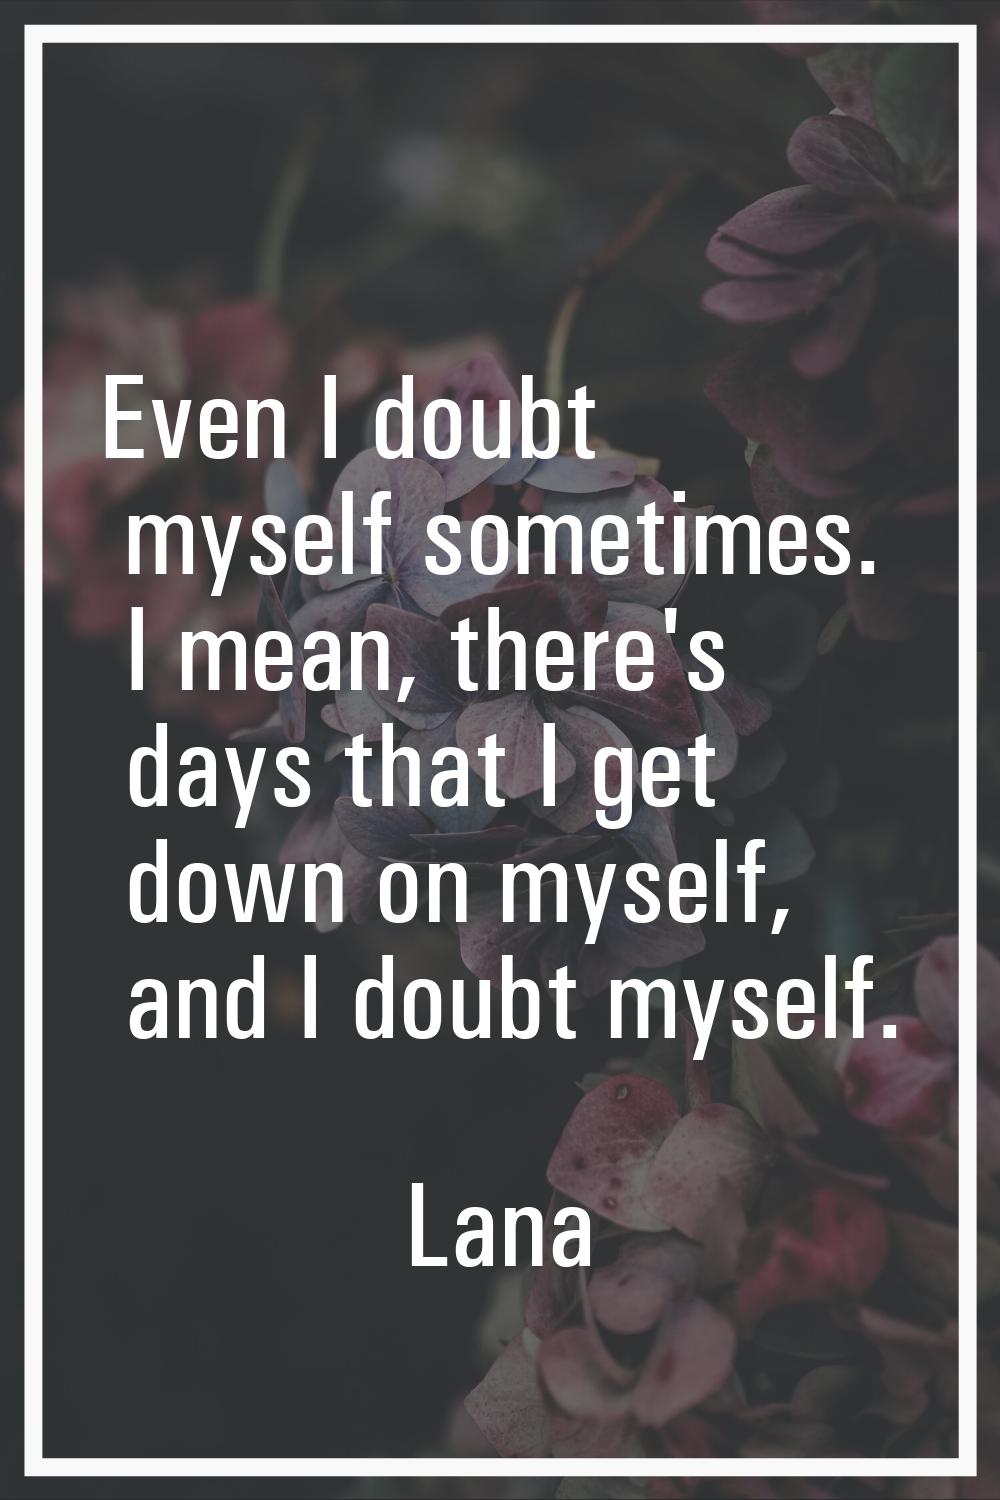 Even I doubt myself sometimes. I mean, there's days that I get down on myself, and I doubt myself.